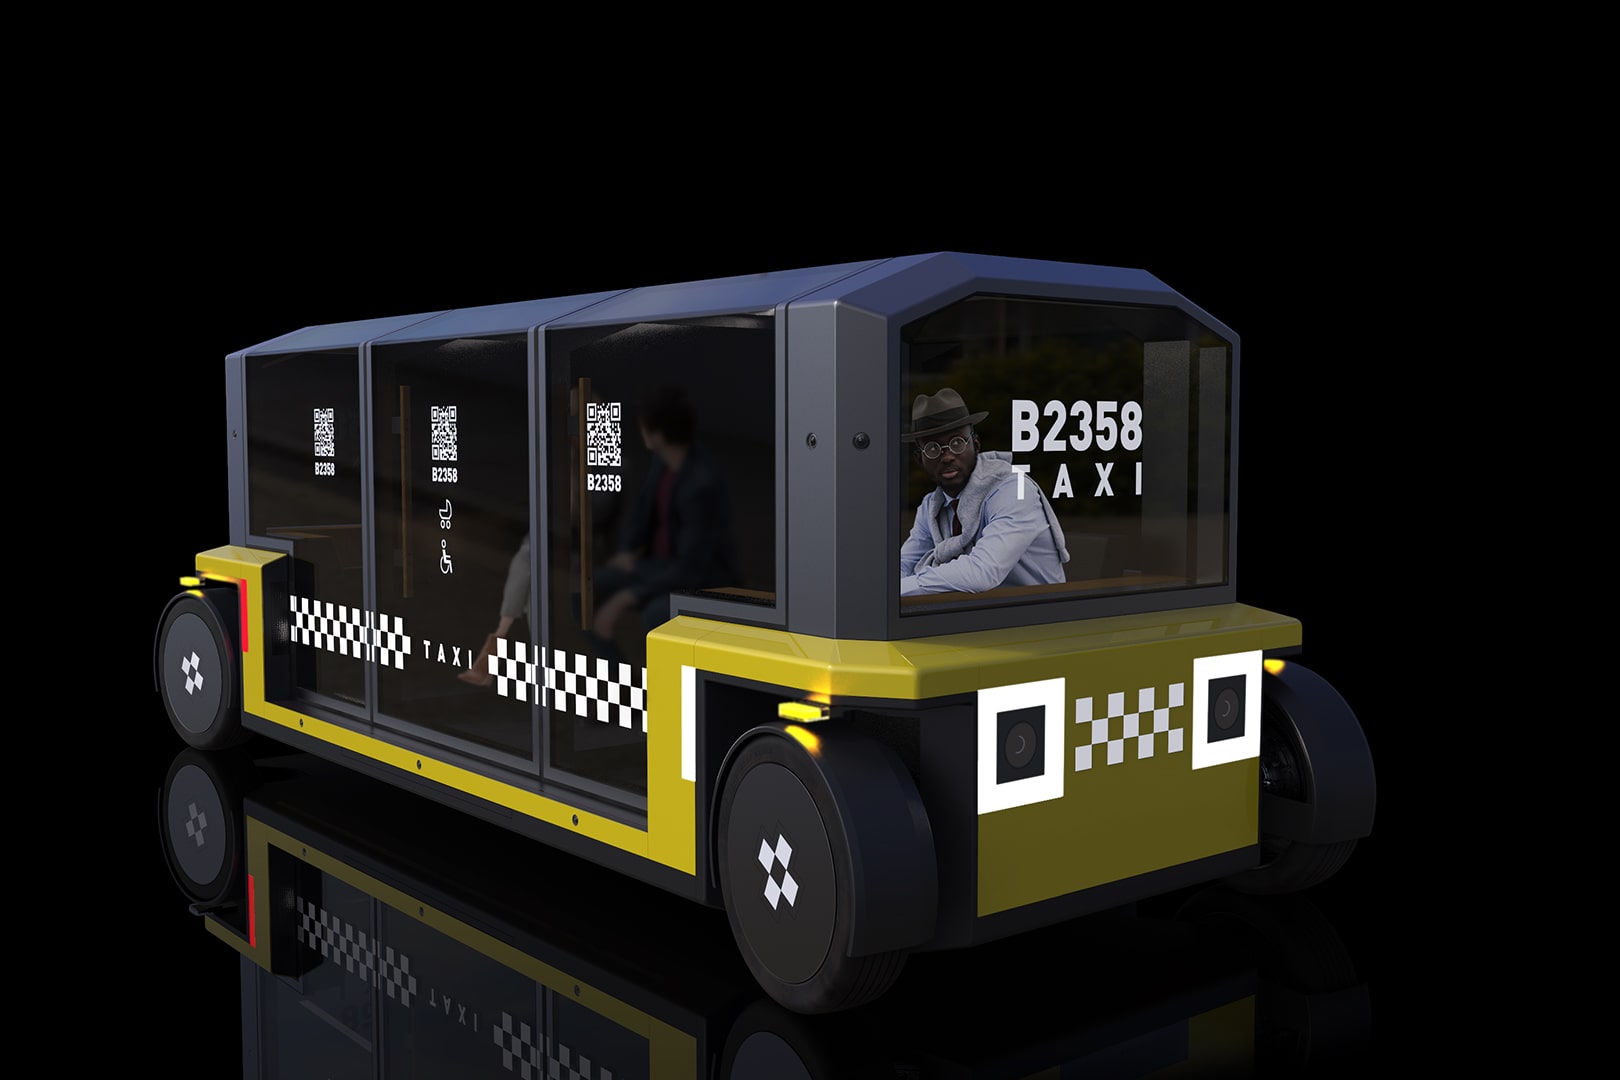 Cabin Taxi front perspective @object_designer